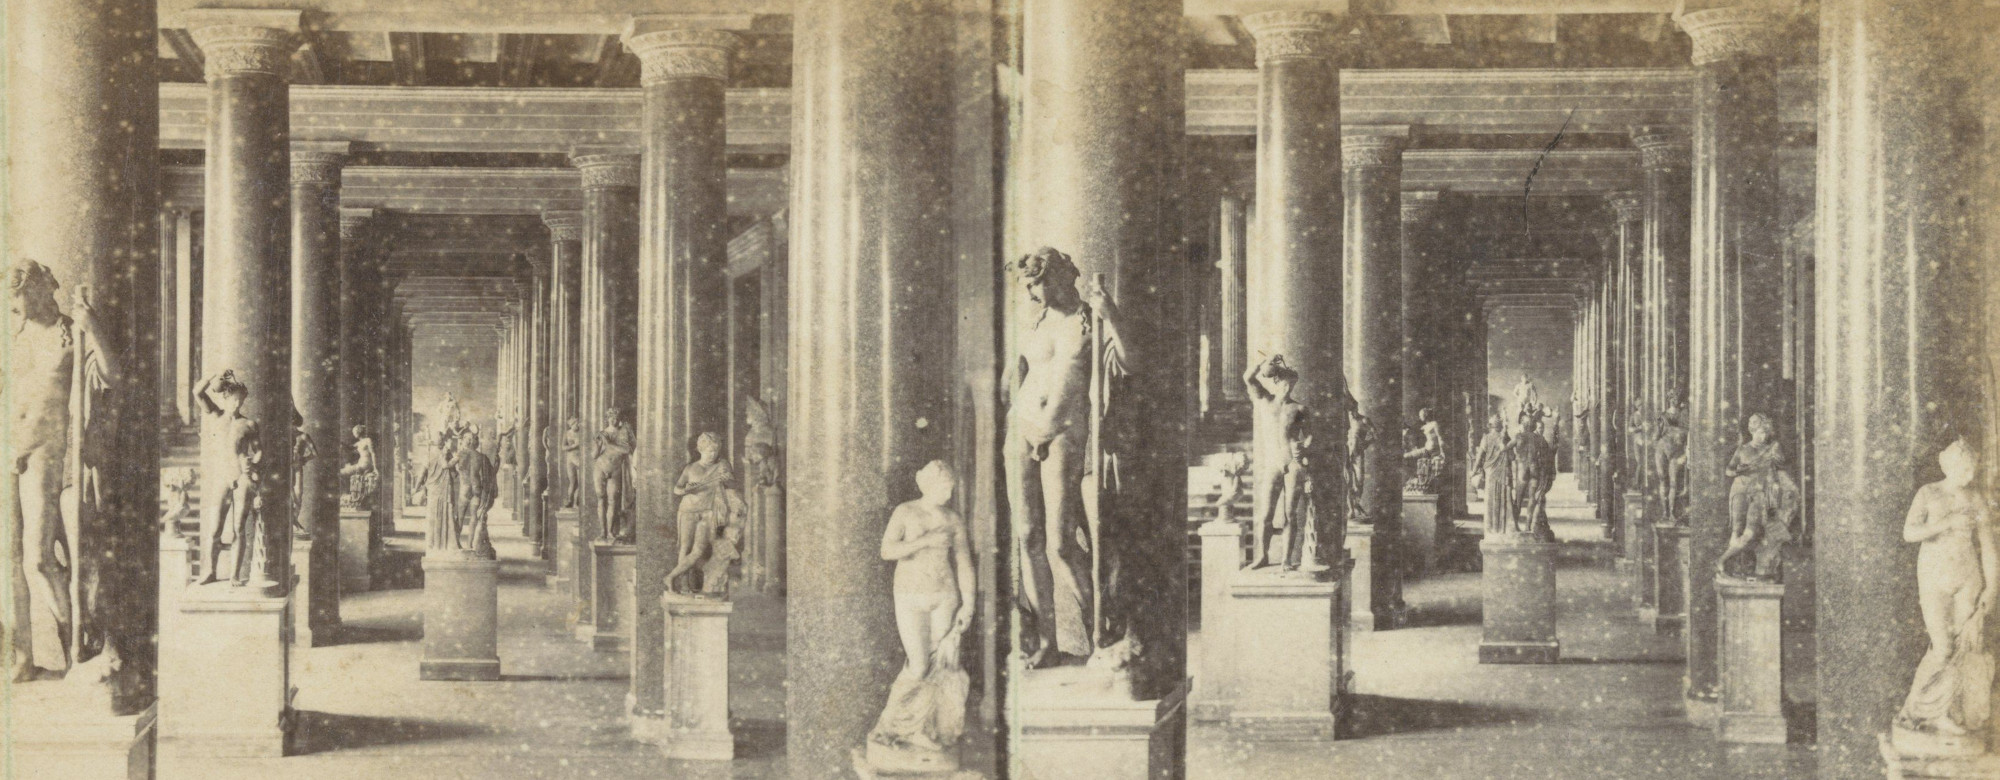 Cropped historical photography of sculpture gallery at the Altes Museum in Berlin.